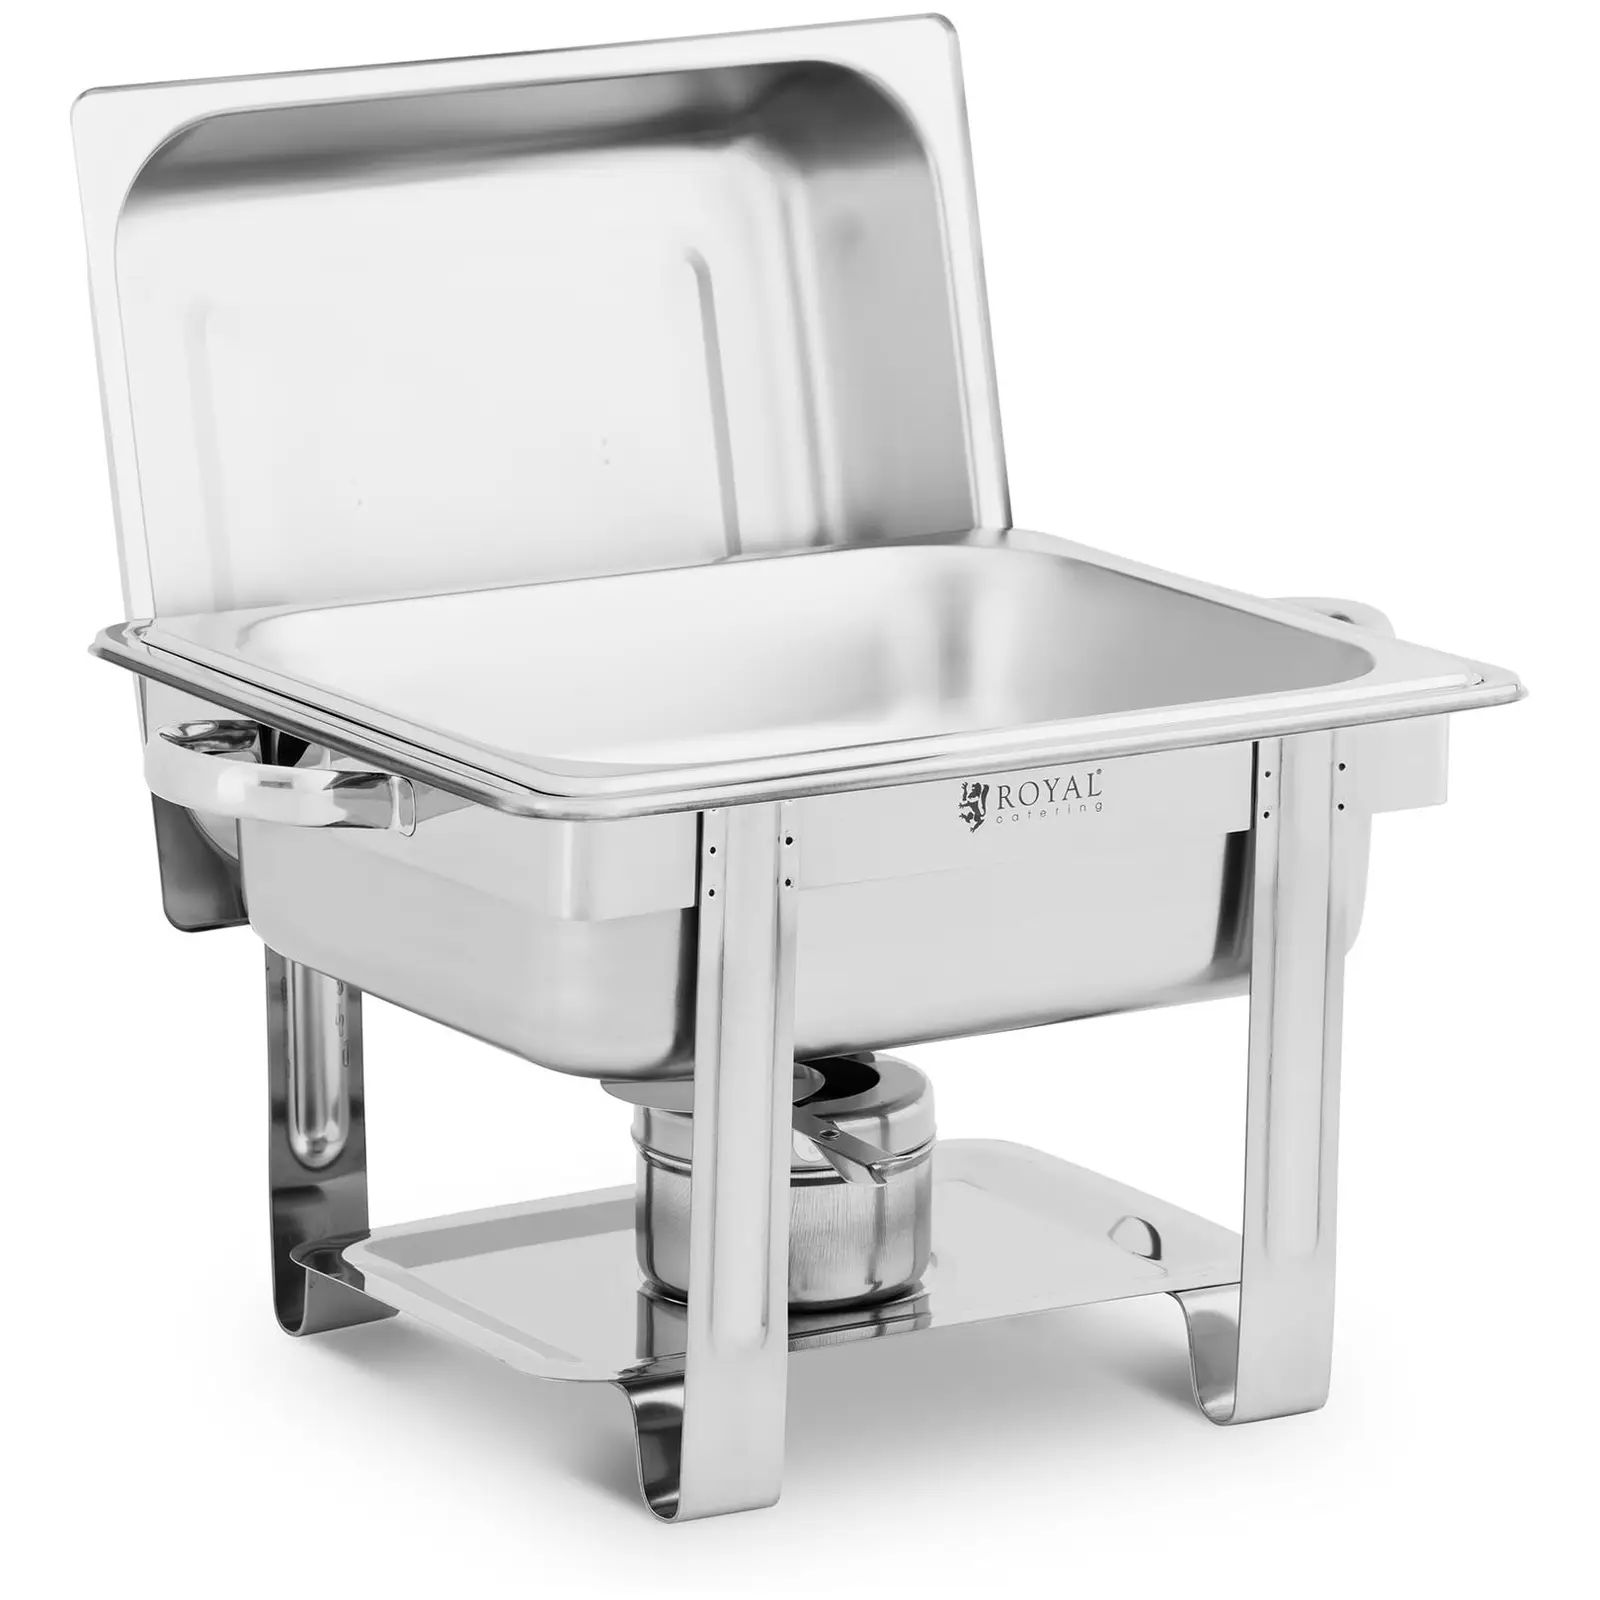 Chafing Dish - 4.5 L - incl. GN container - Royal Catering